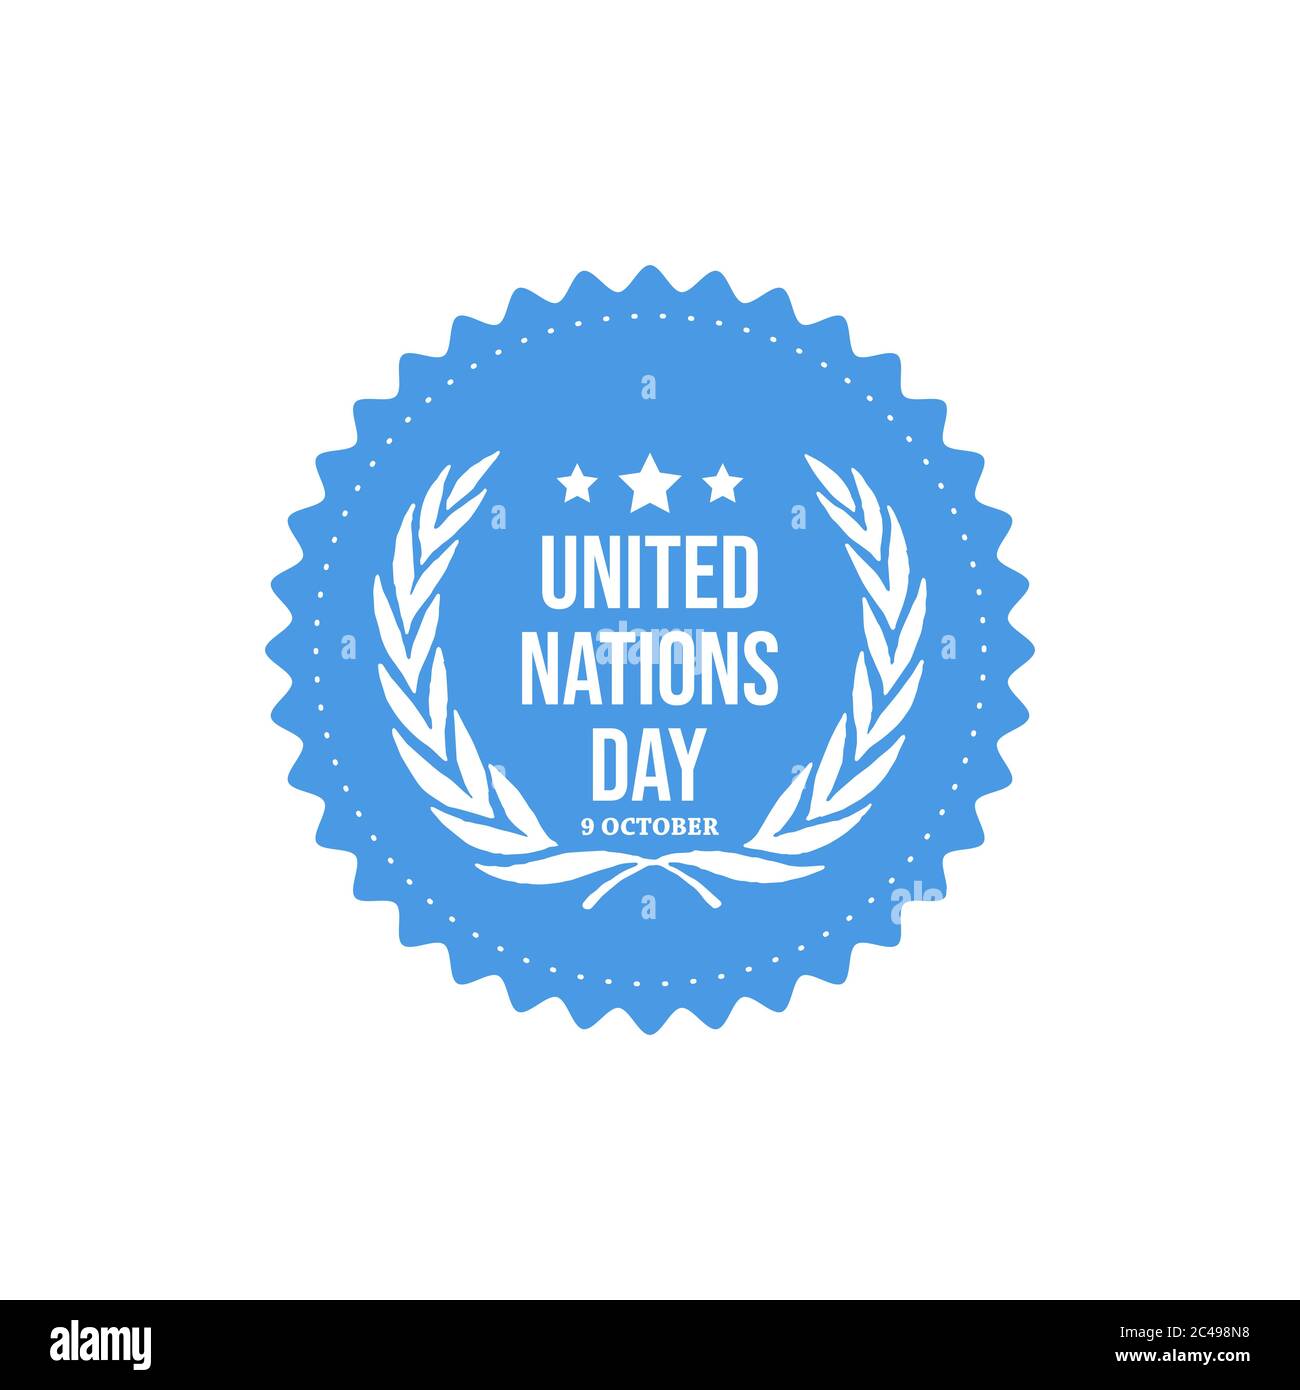 United Nations Day Banner or background for event day vector design image illustration Stock Vector